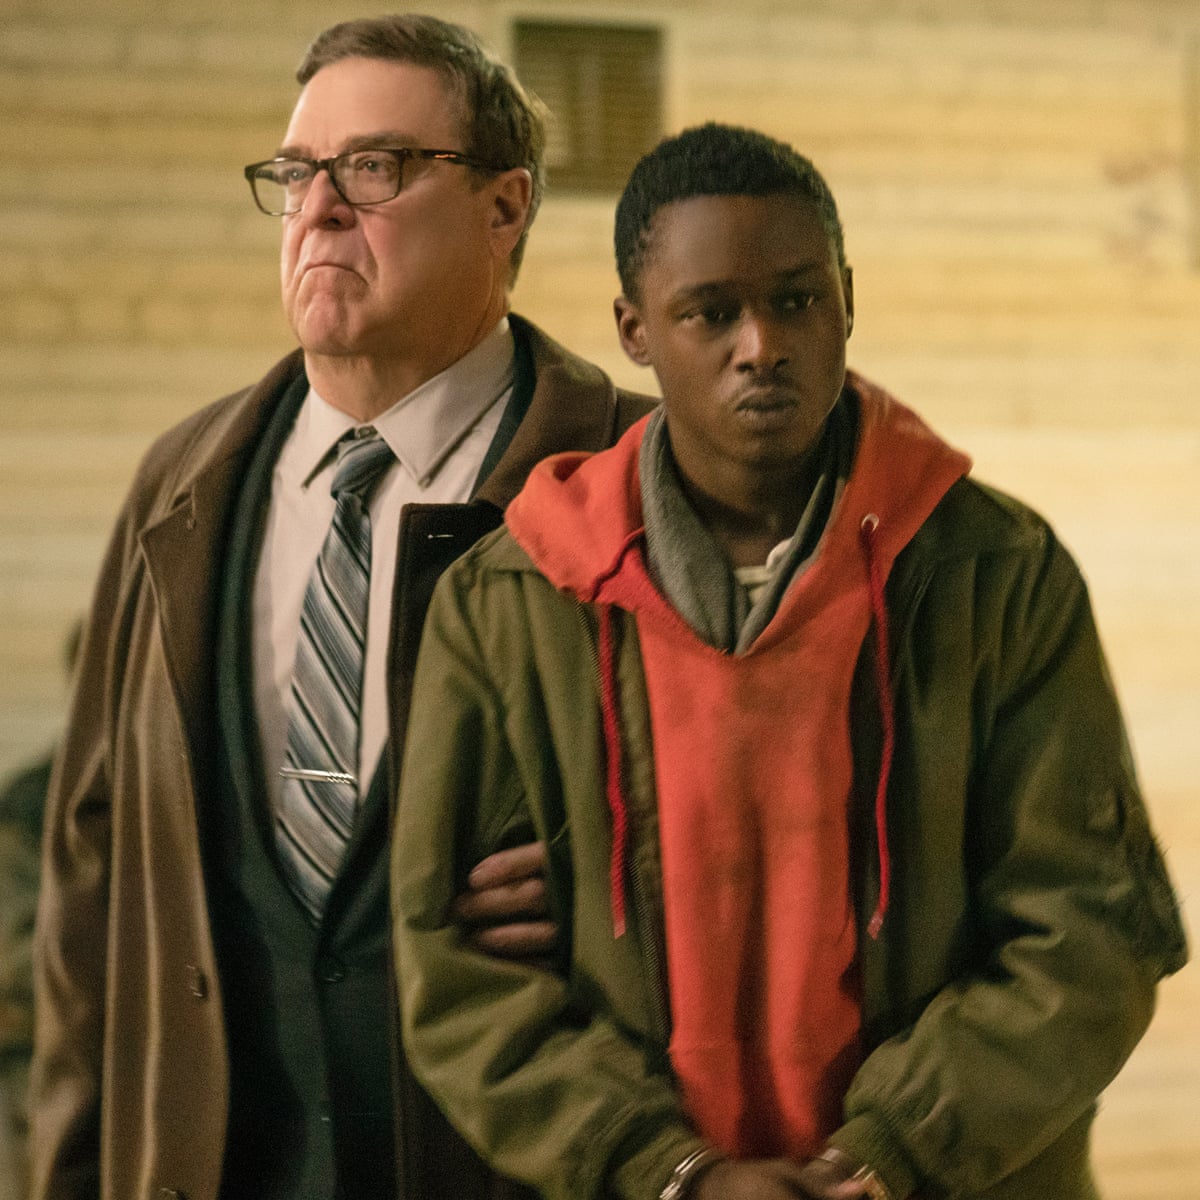 Captive State review – ambitious sci-fi thriller offers up uneven intrigue, Science fiction and fantasy films